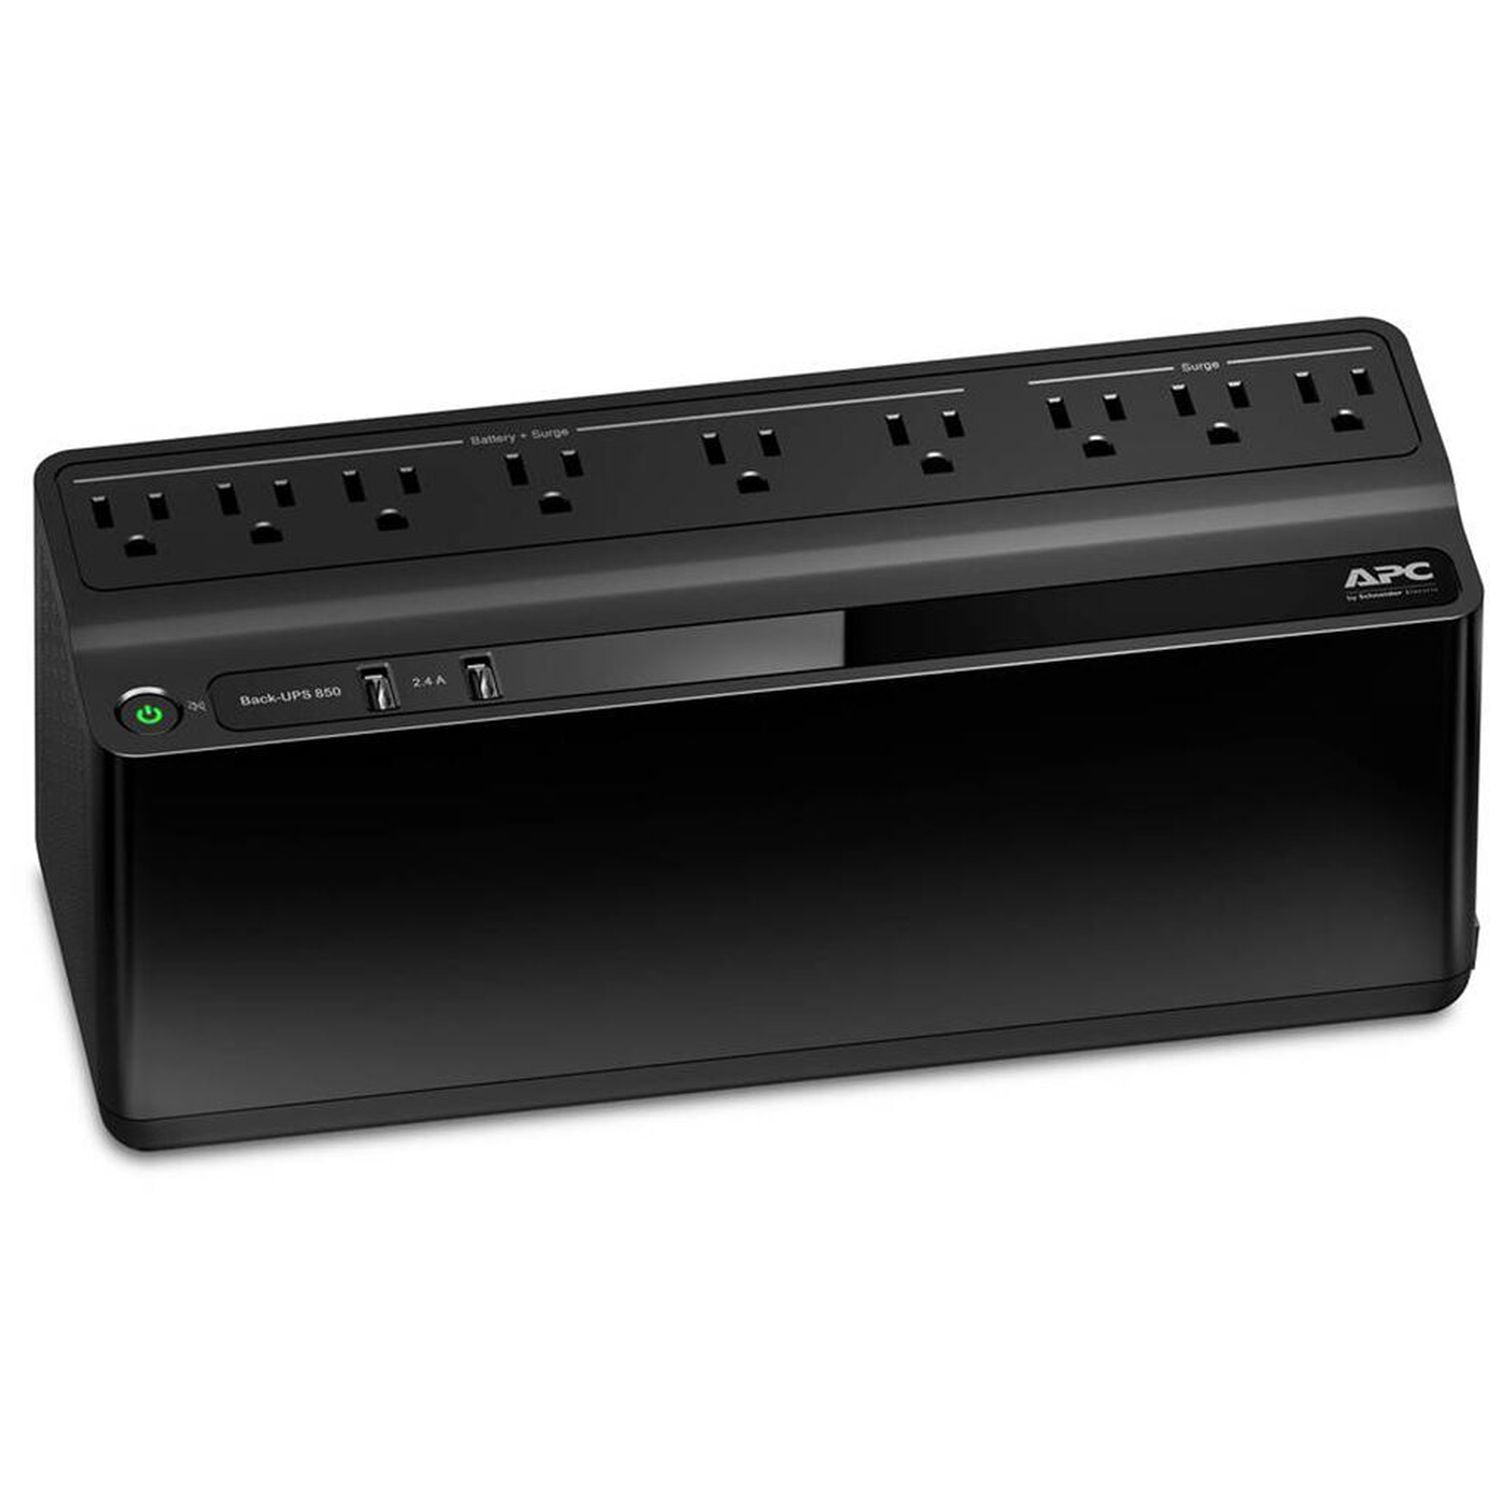 Power Brick with 9 outlets